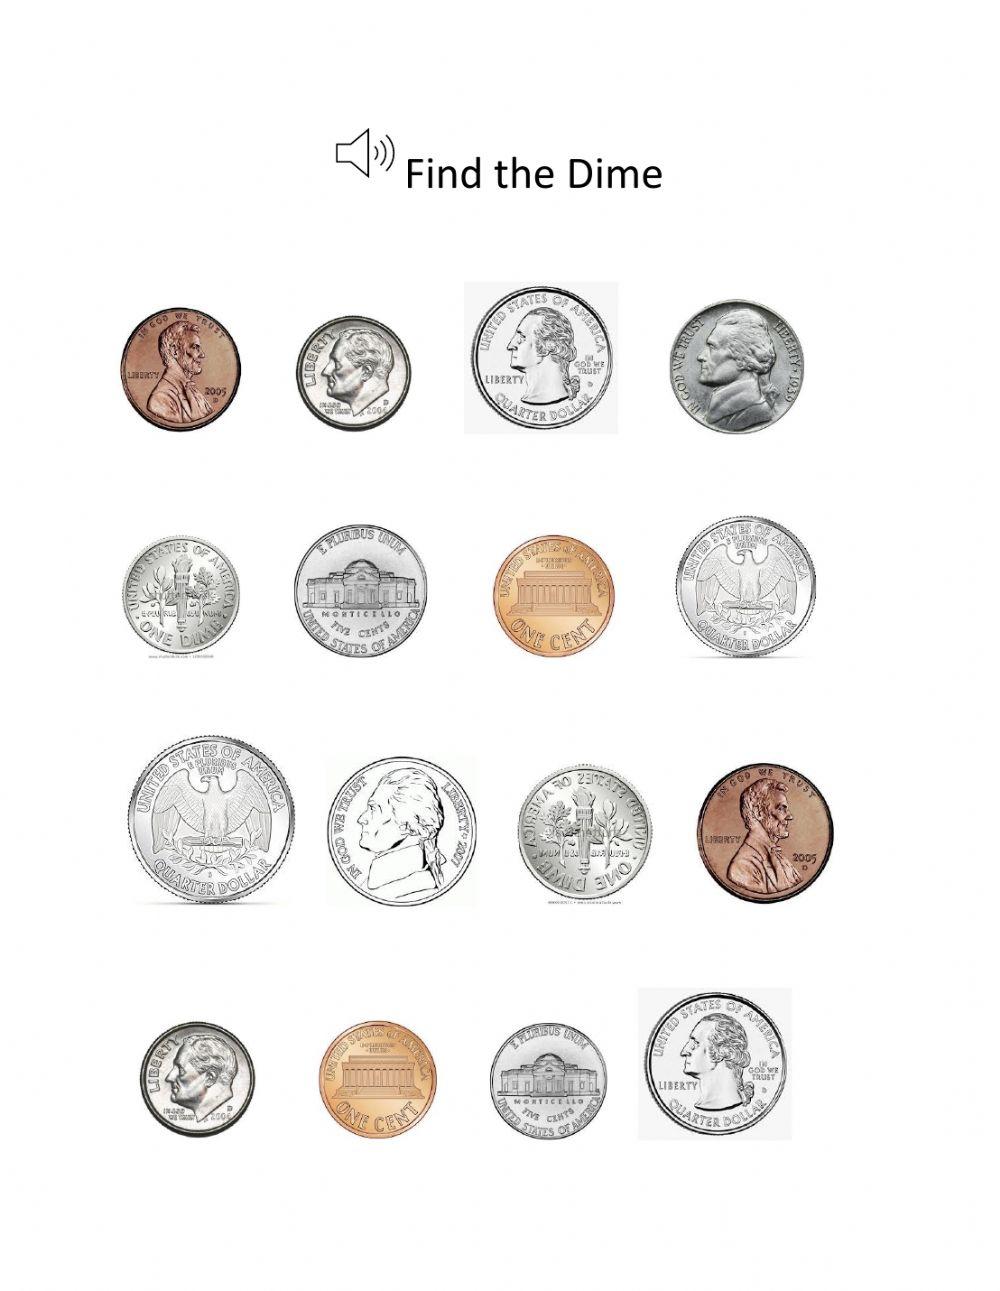 Find the dime